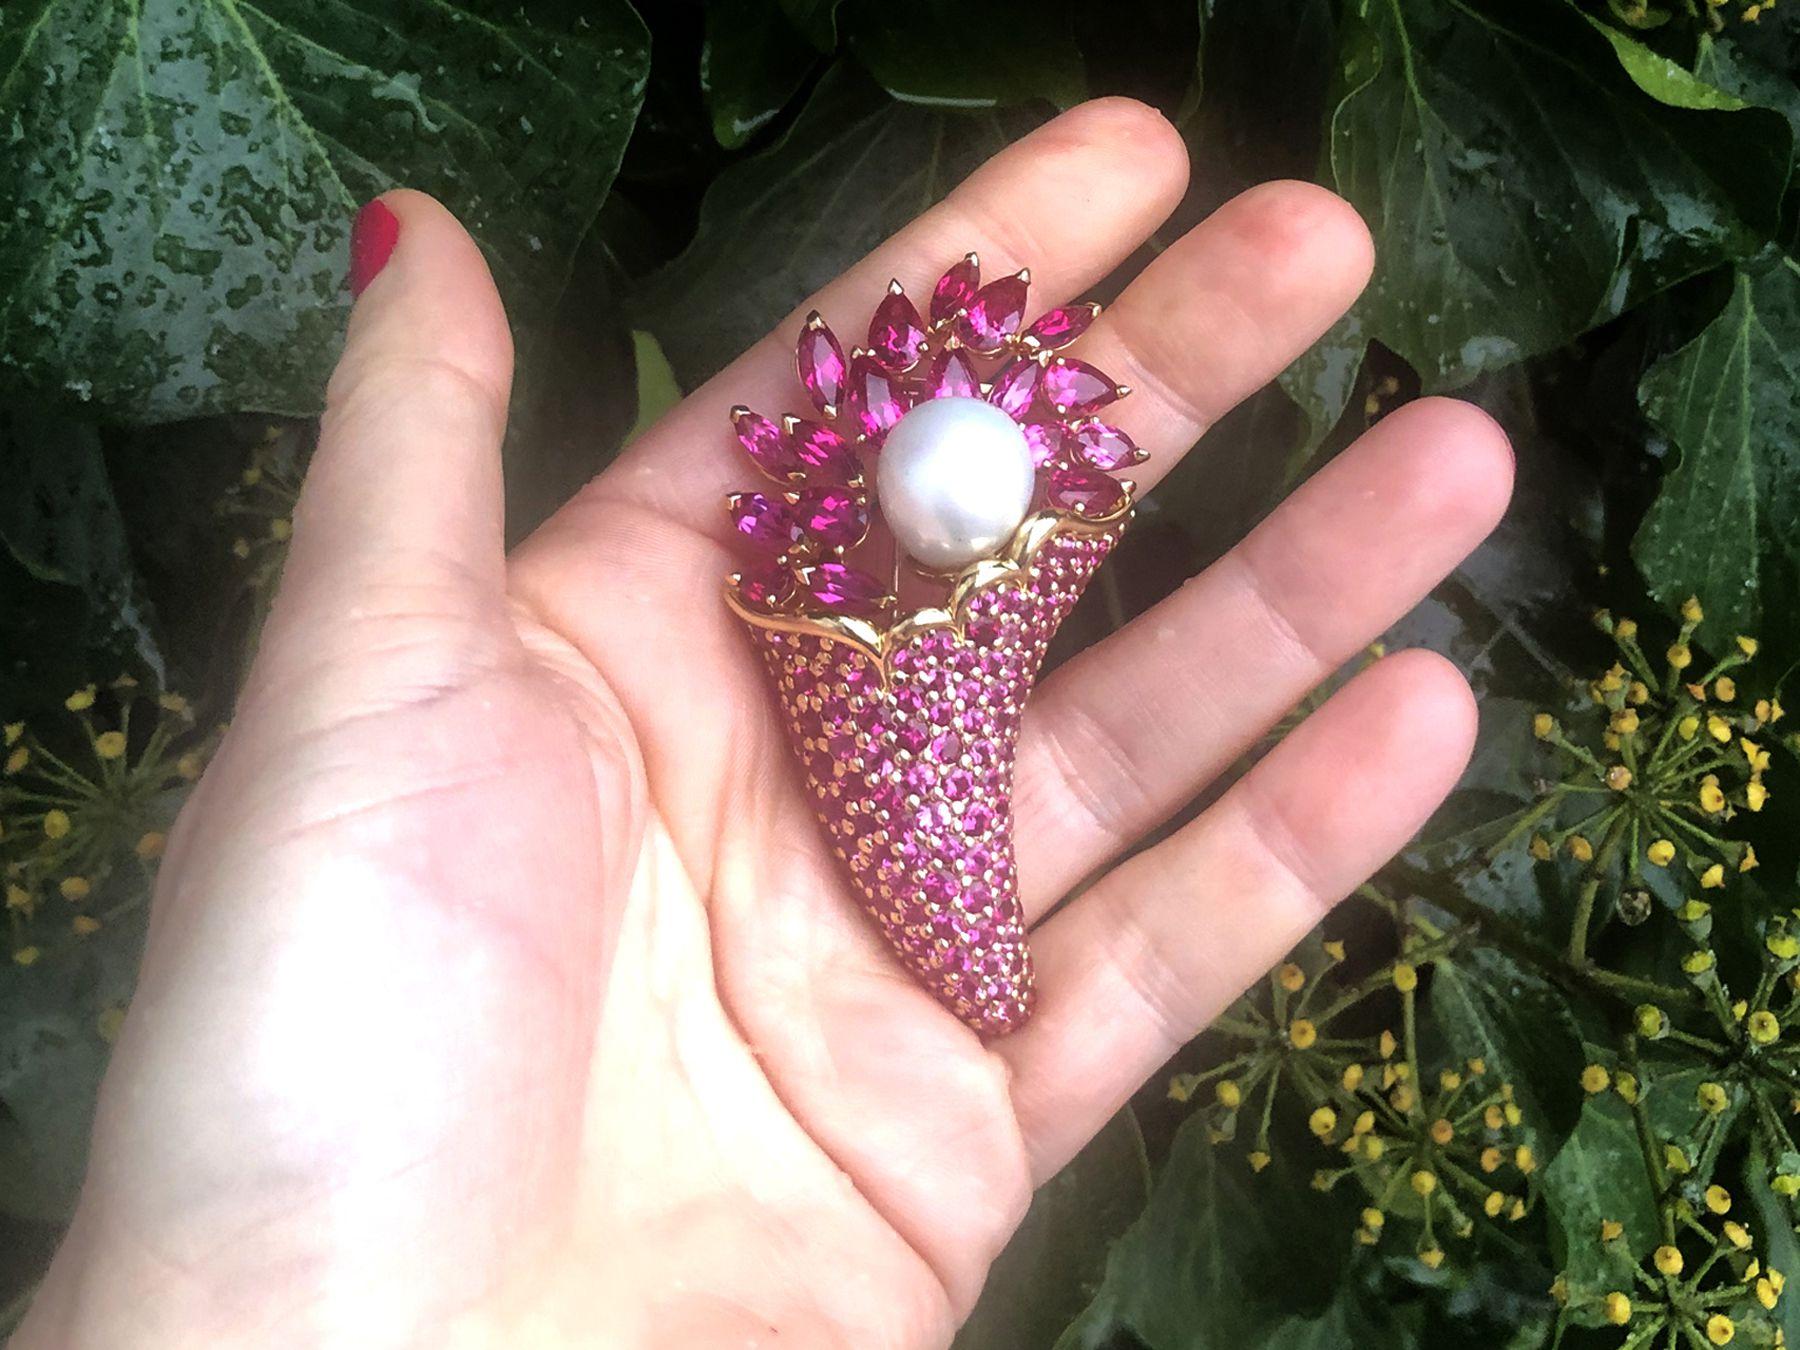 This stunning, fine and impressive vintage pearl and pink tourmaline brooch has been crafted in 18k yellow gold.

This substantial tourmaline and pearl vintage brooch has been modelled in the form of a single floral bouquet/nosegay.

The setting is